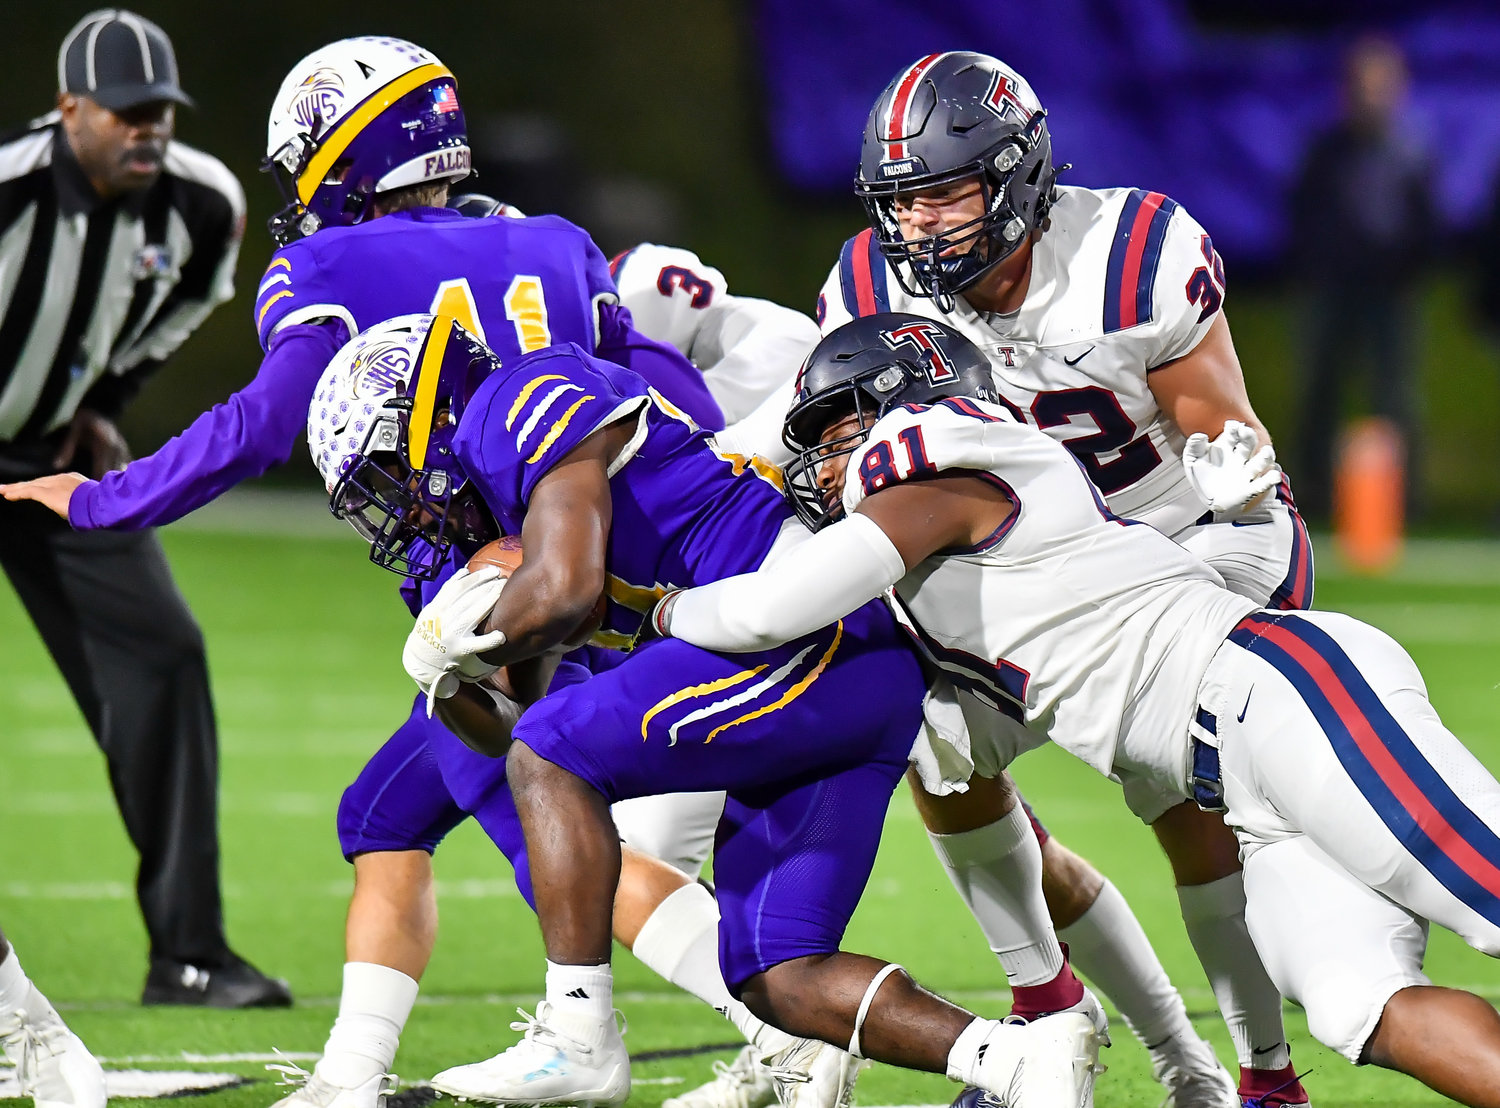 Houston Tx. Nov 19, 2021: Tompkins #81 Sean Dubose, jr makes the stop on Jersey Village, Rashon Estes #24 during the UIL area playoff game between Tompkins and Jersey Village at Pridgeon Stadium in Houston. (Photo by Mark Goodman / Katy Times)